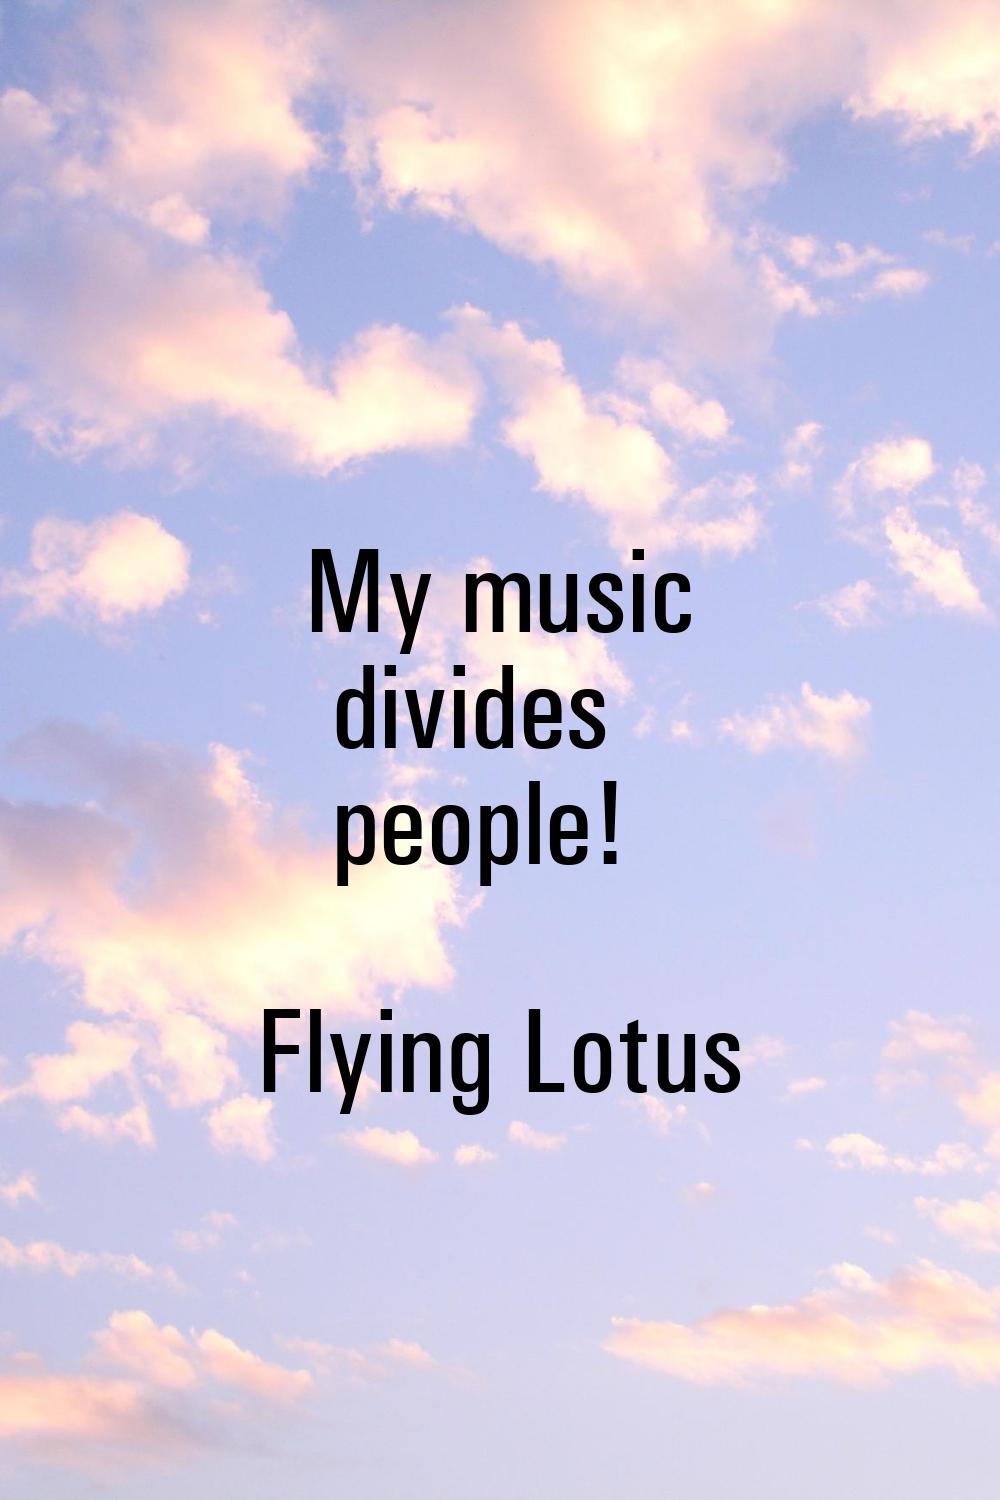 My music divides people!